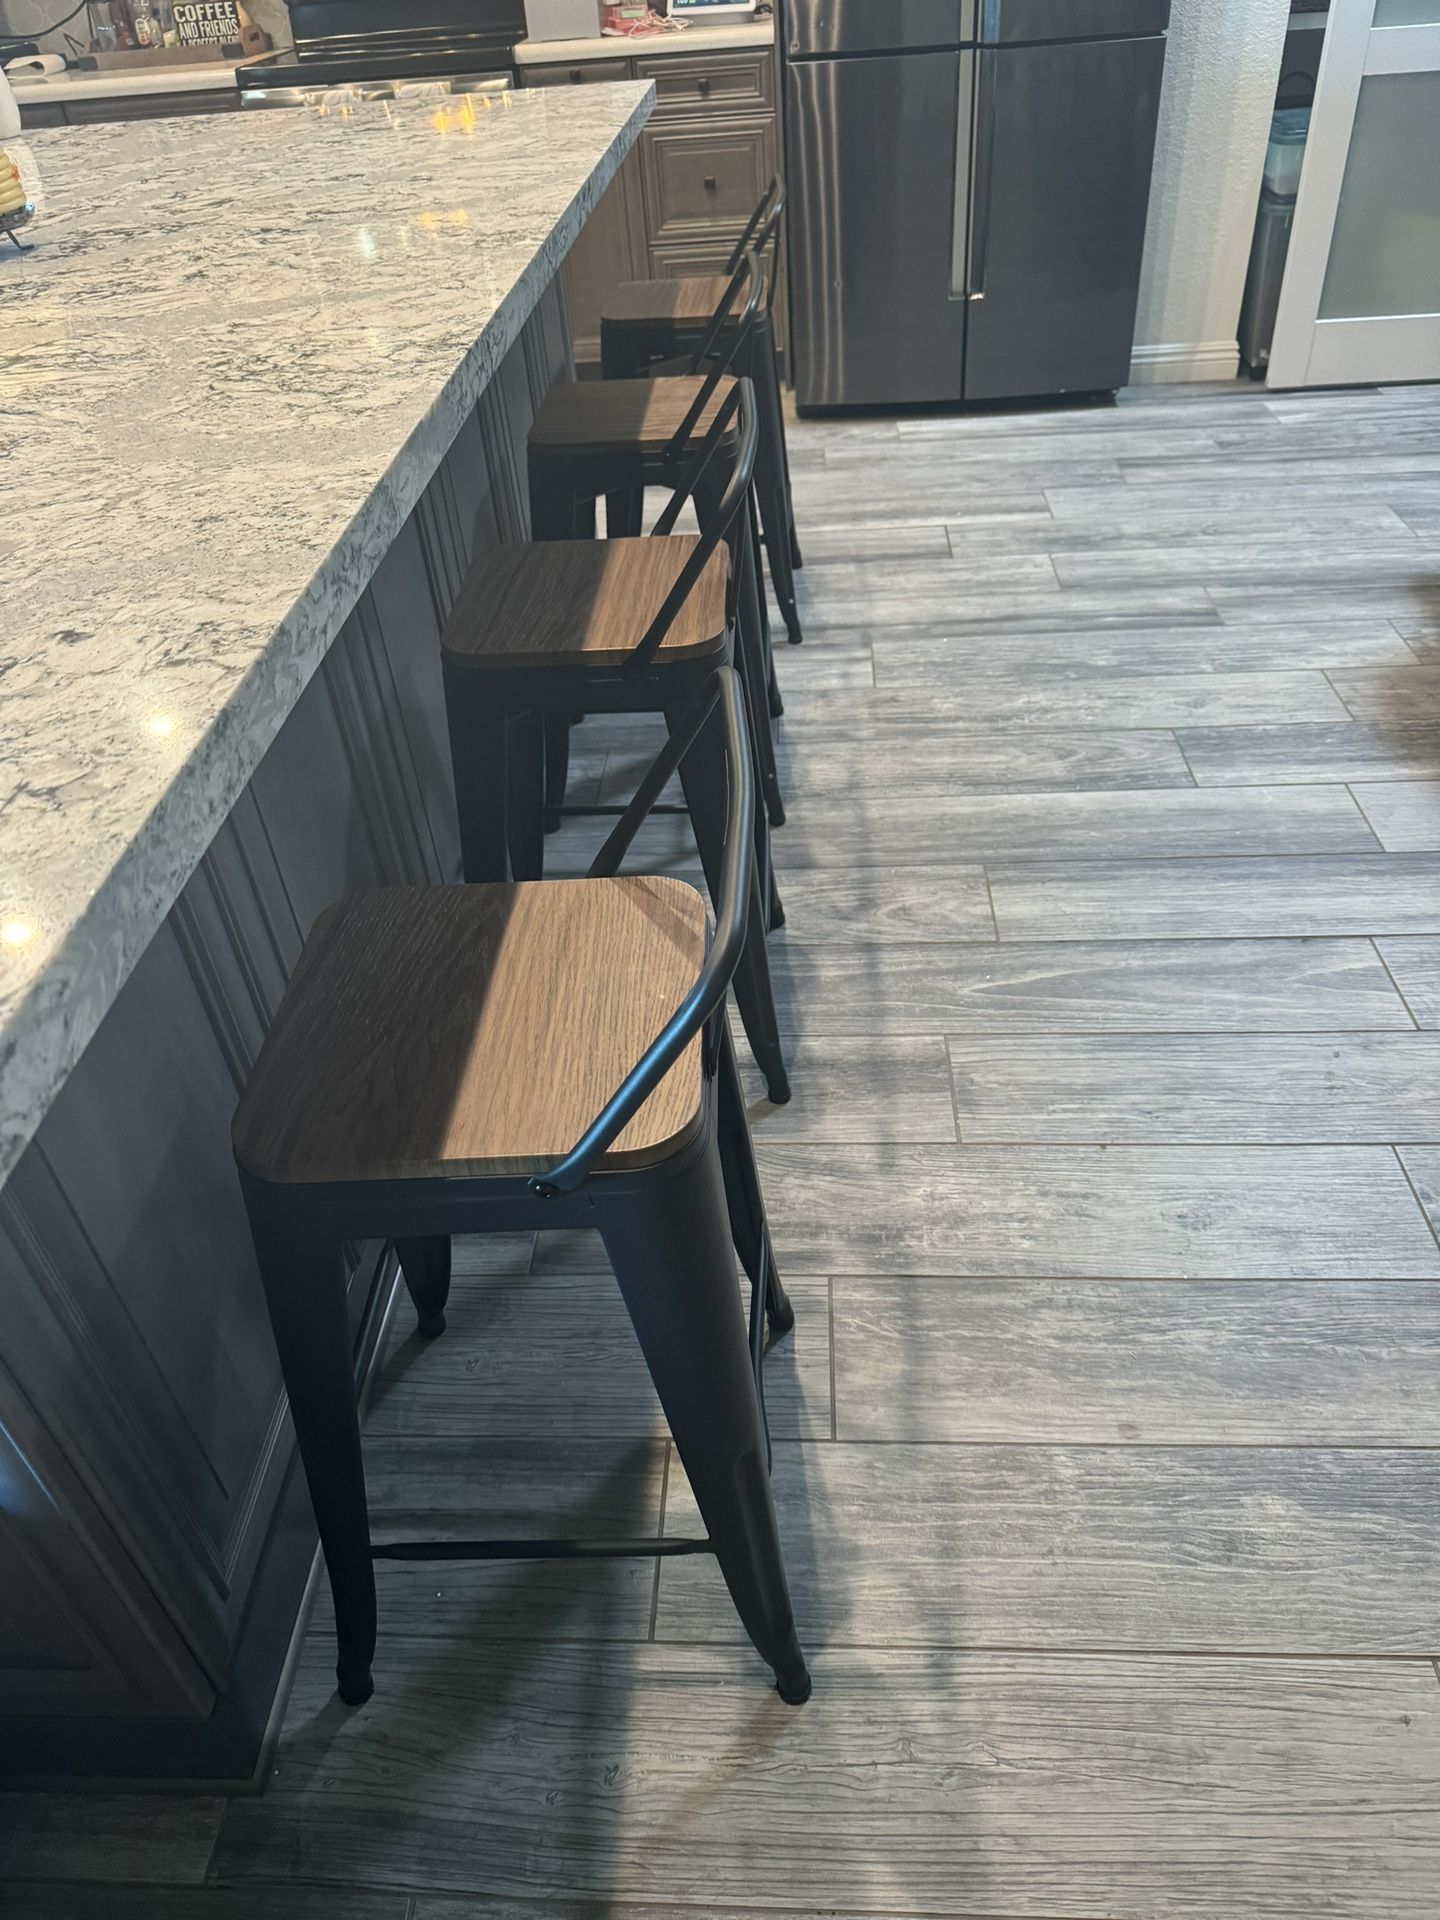 New  Bar Stools Set Of 4 (30 In)